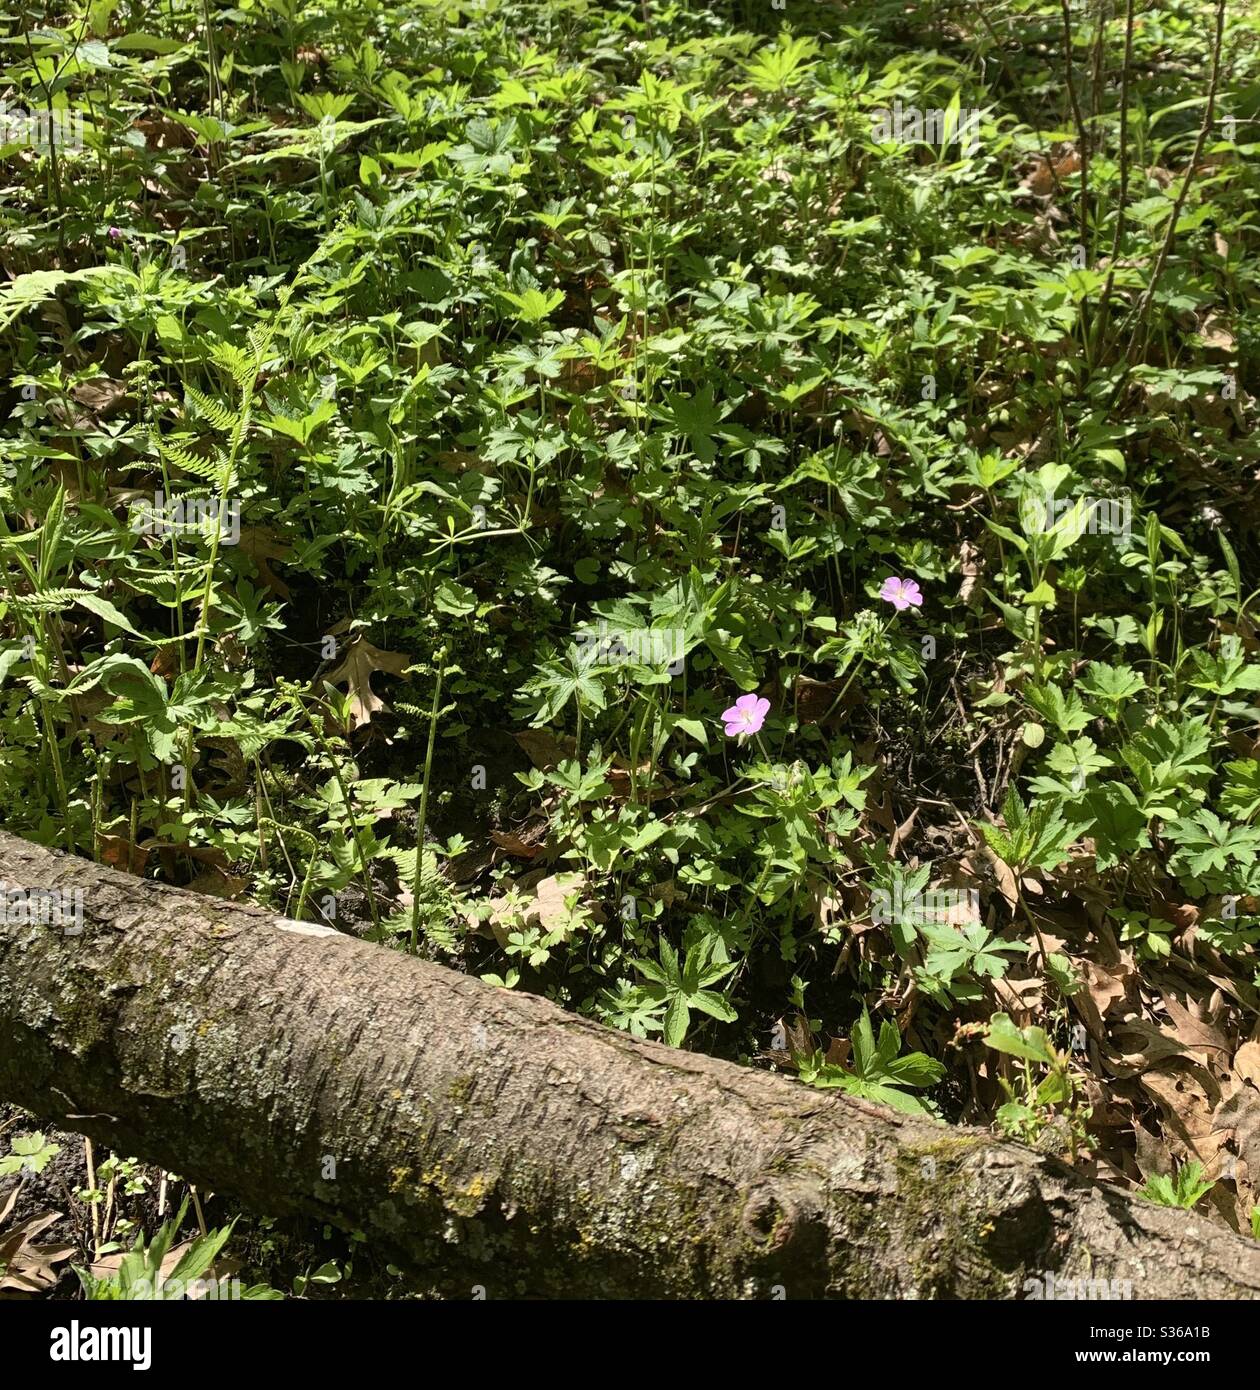 DUBUQUE, IOWA, May 15, 2020--Landscape photo of fallen tree among green vegetation and purple flowers in park under a bright blue sky on a sunny spring day. Stock Photo